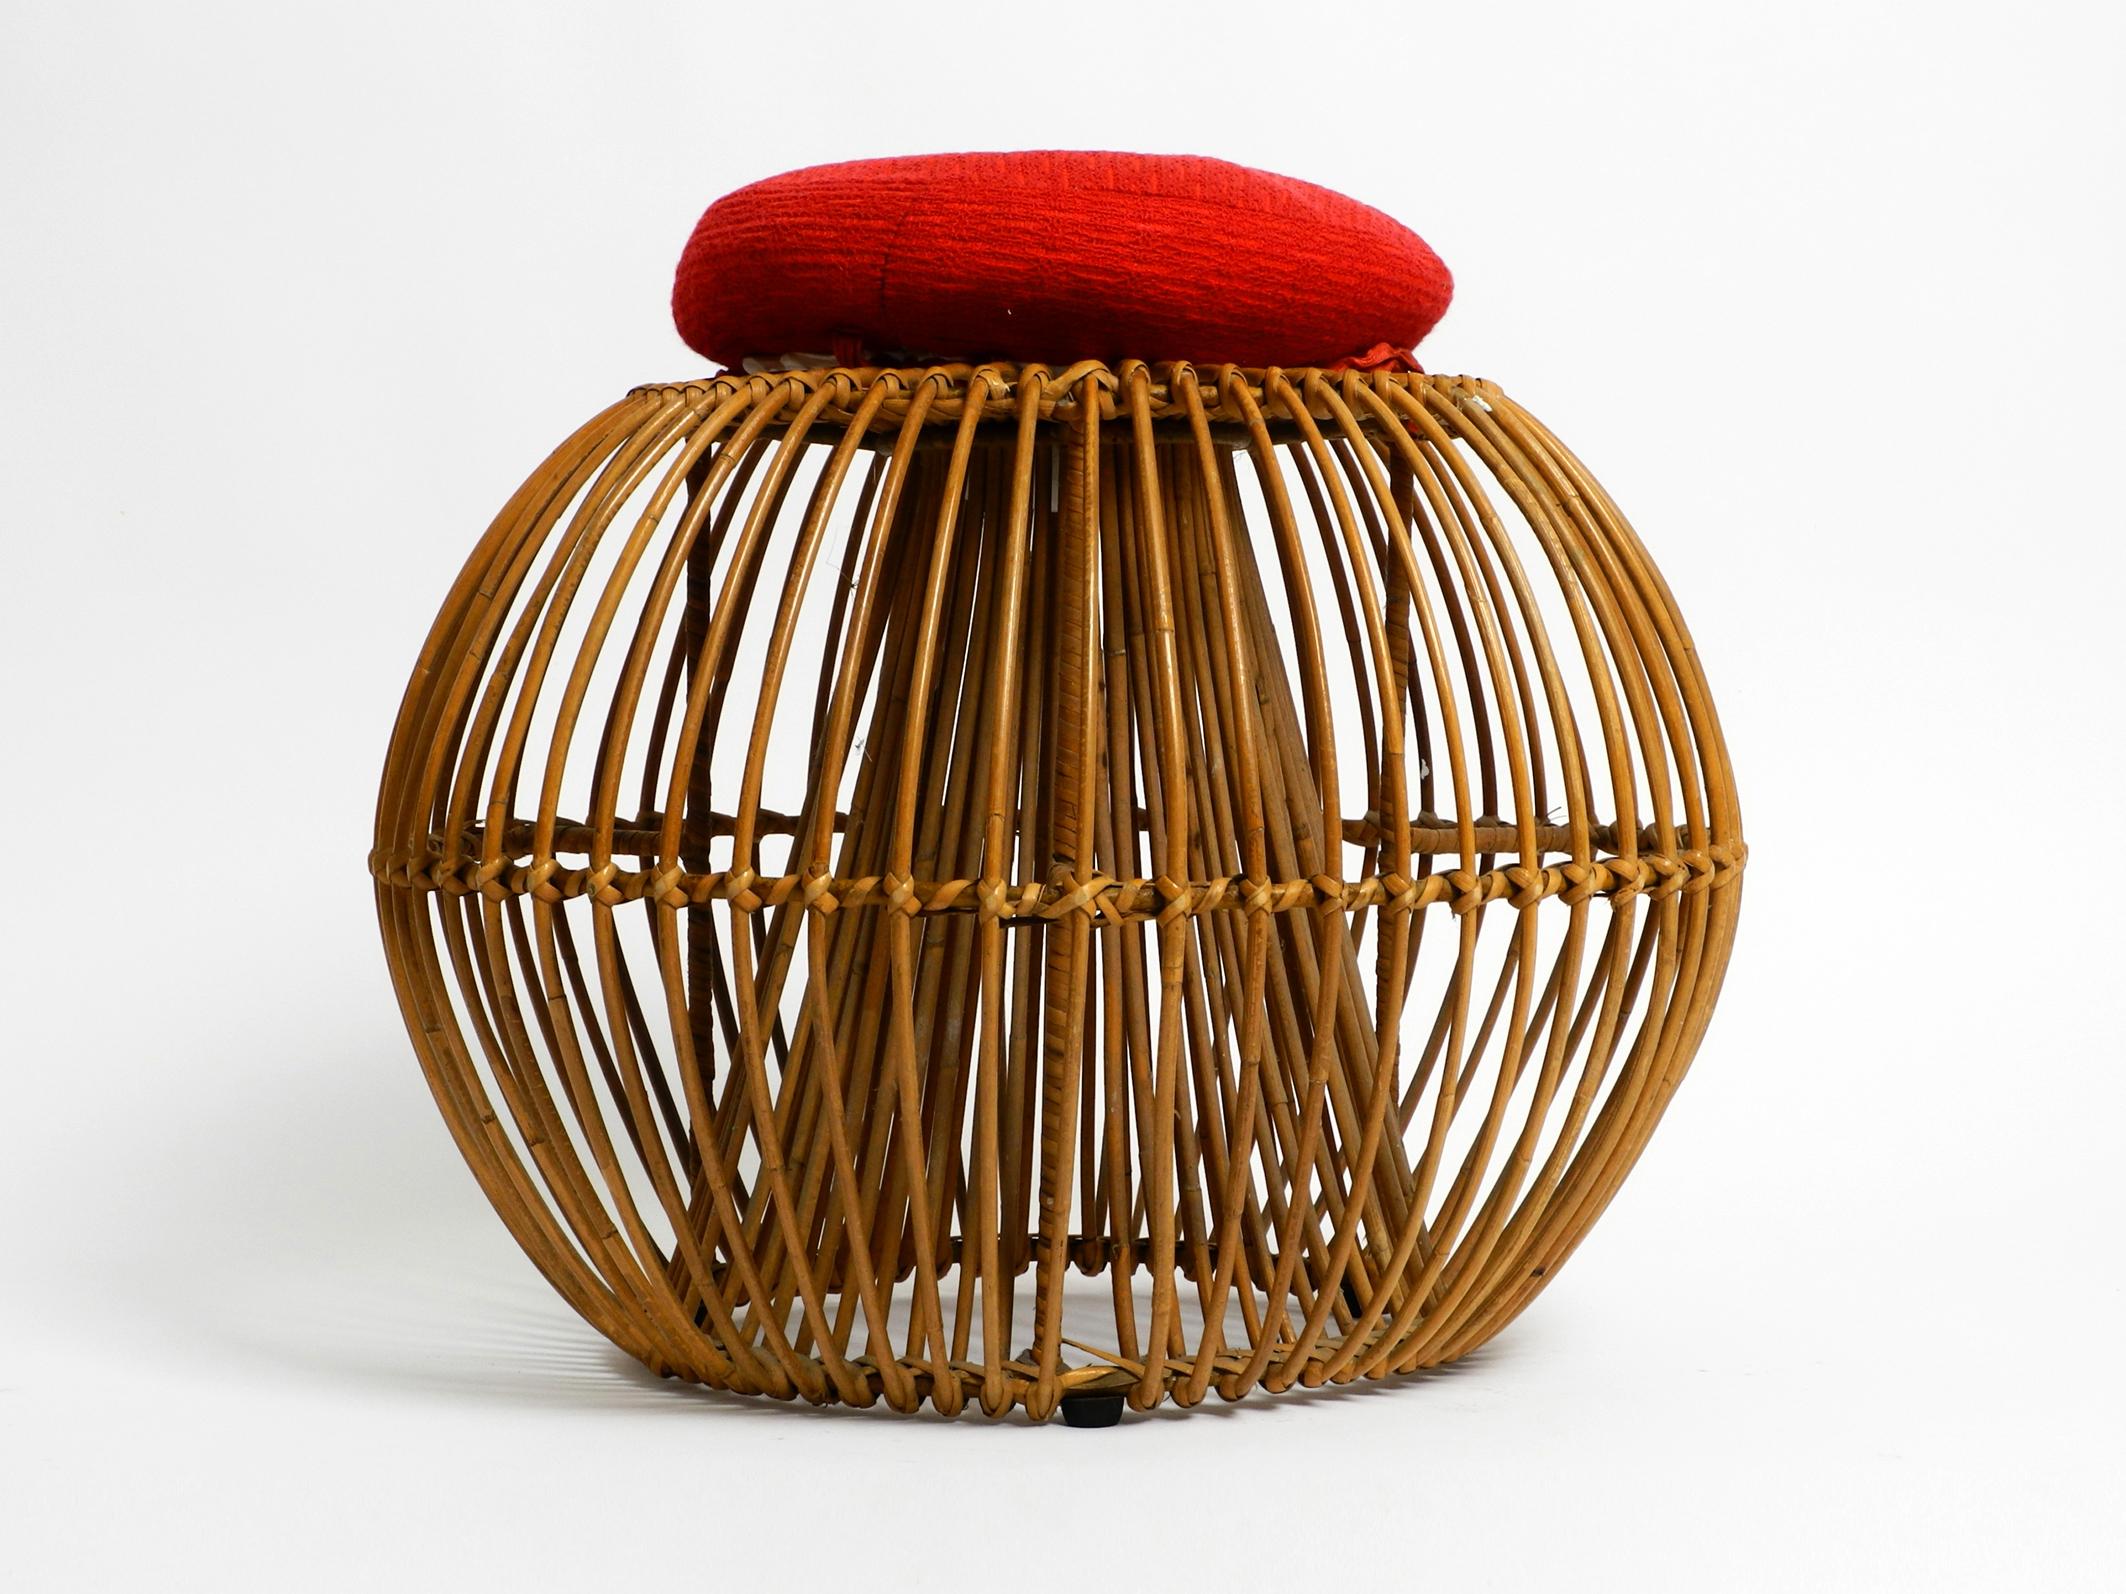 Beautiful, very rare original 1960s bamboo rattan stool. Made in Italy.
Unusual Italian design, very decorative.
Very elaborately made of bamboo with a metal frame for stability.
Very good sought-after classic with great seating comfort.
Stool